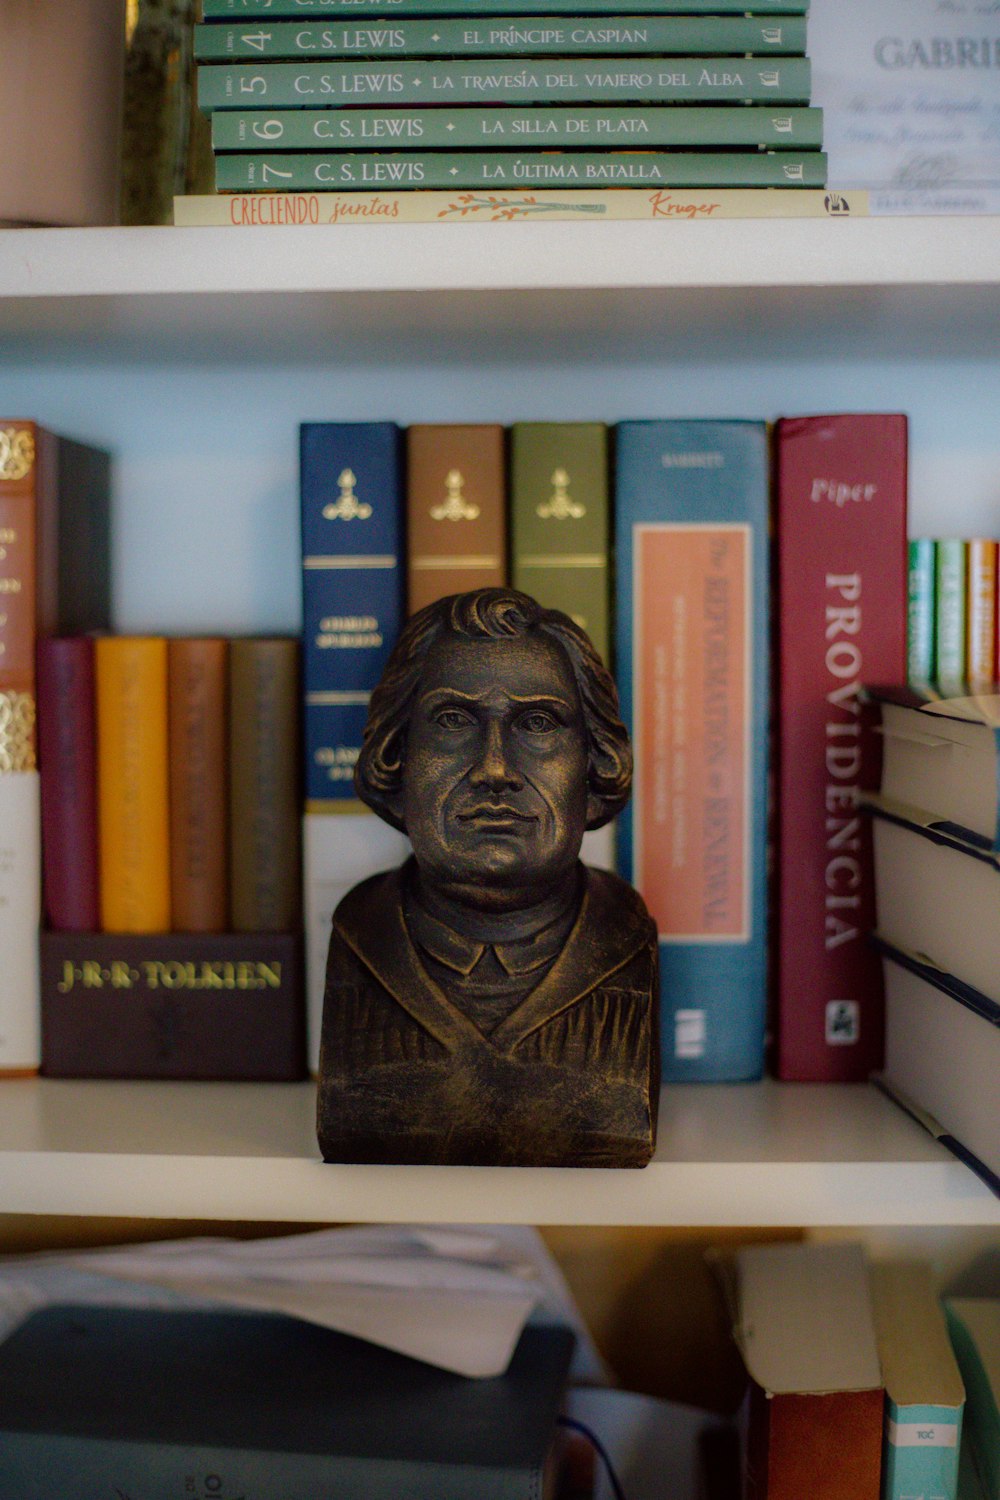 a book shelf with books and a bust of a man